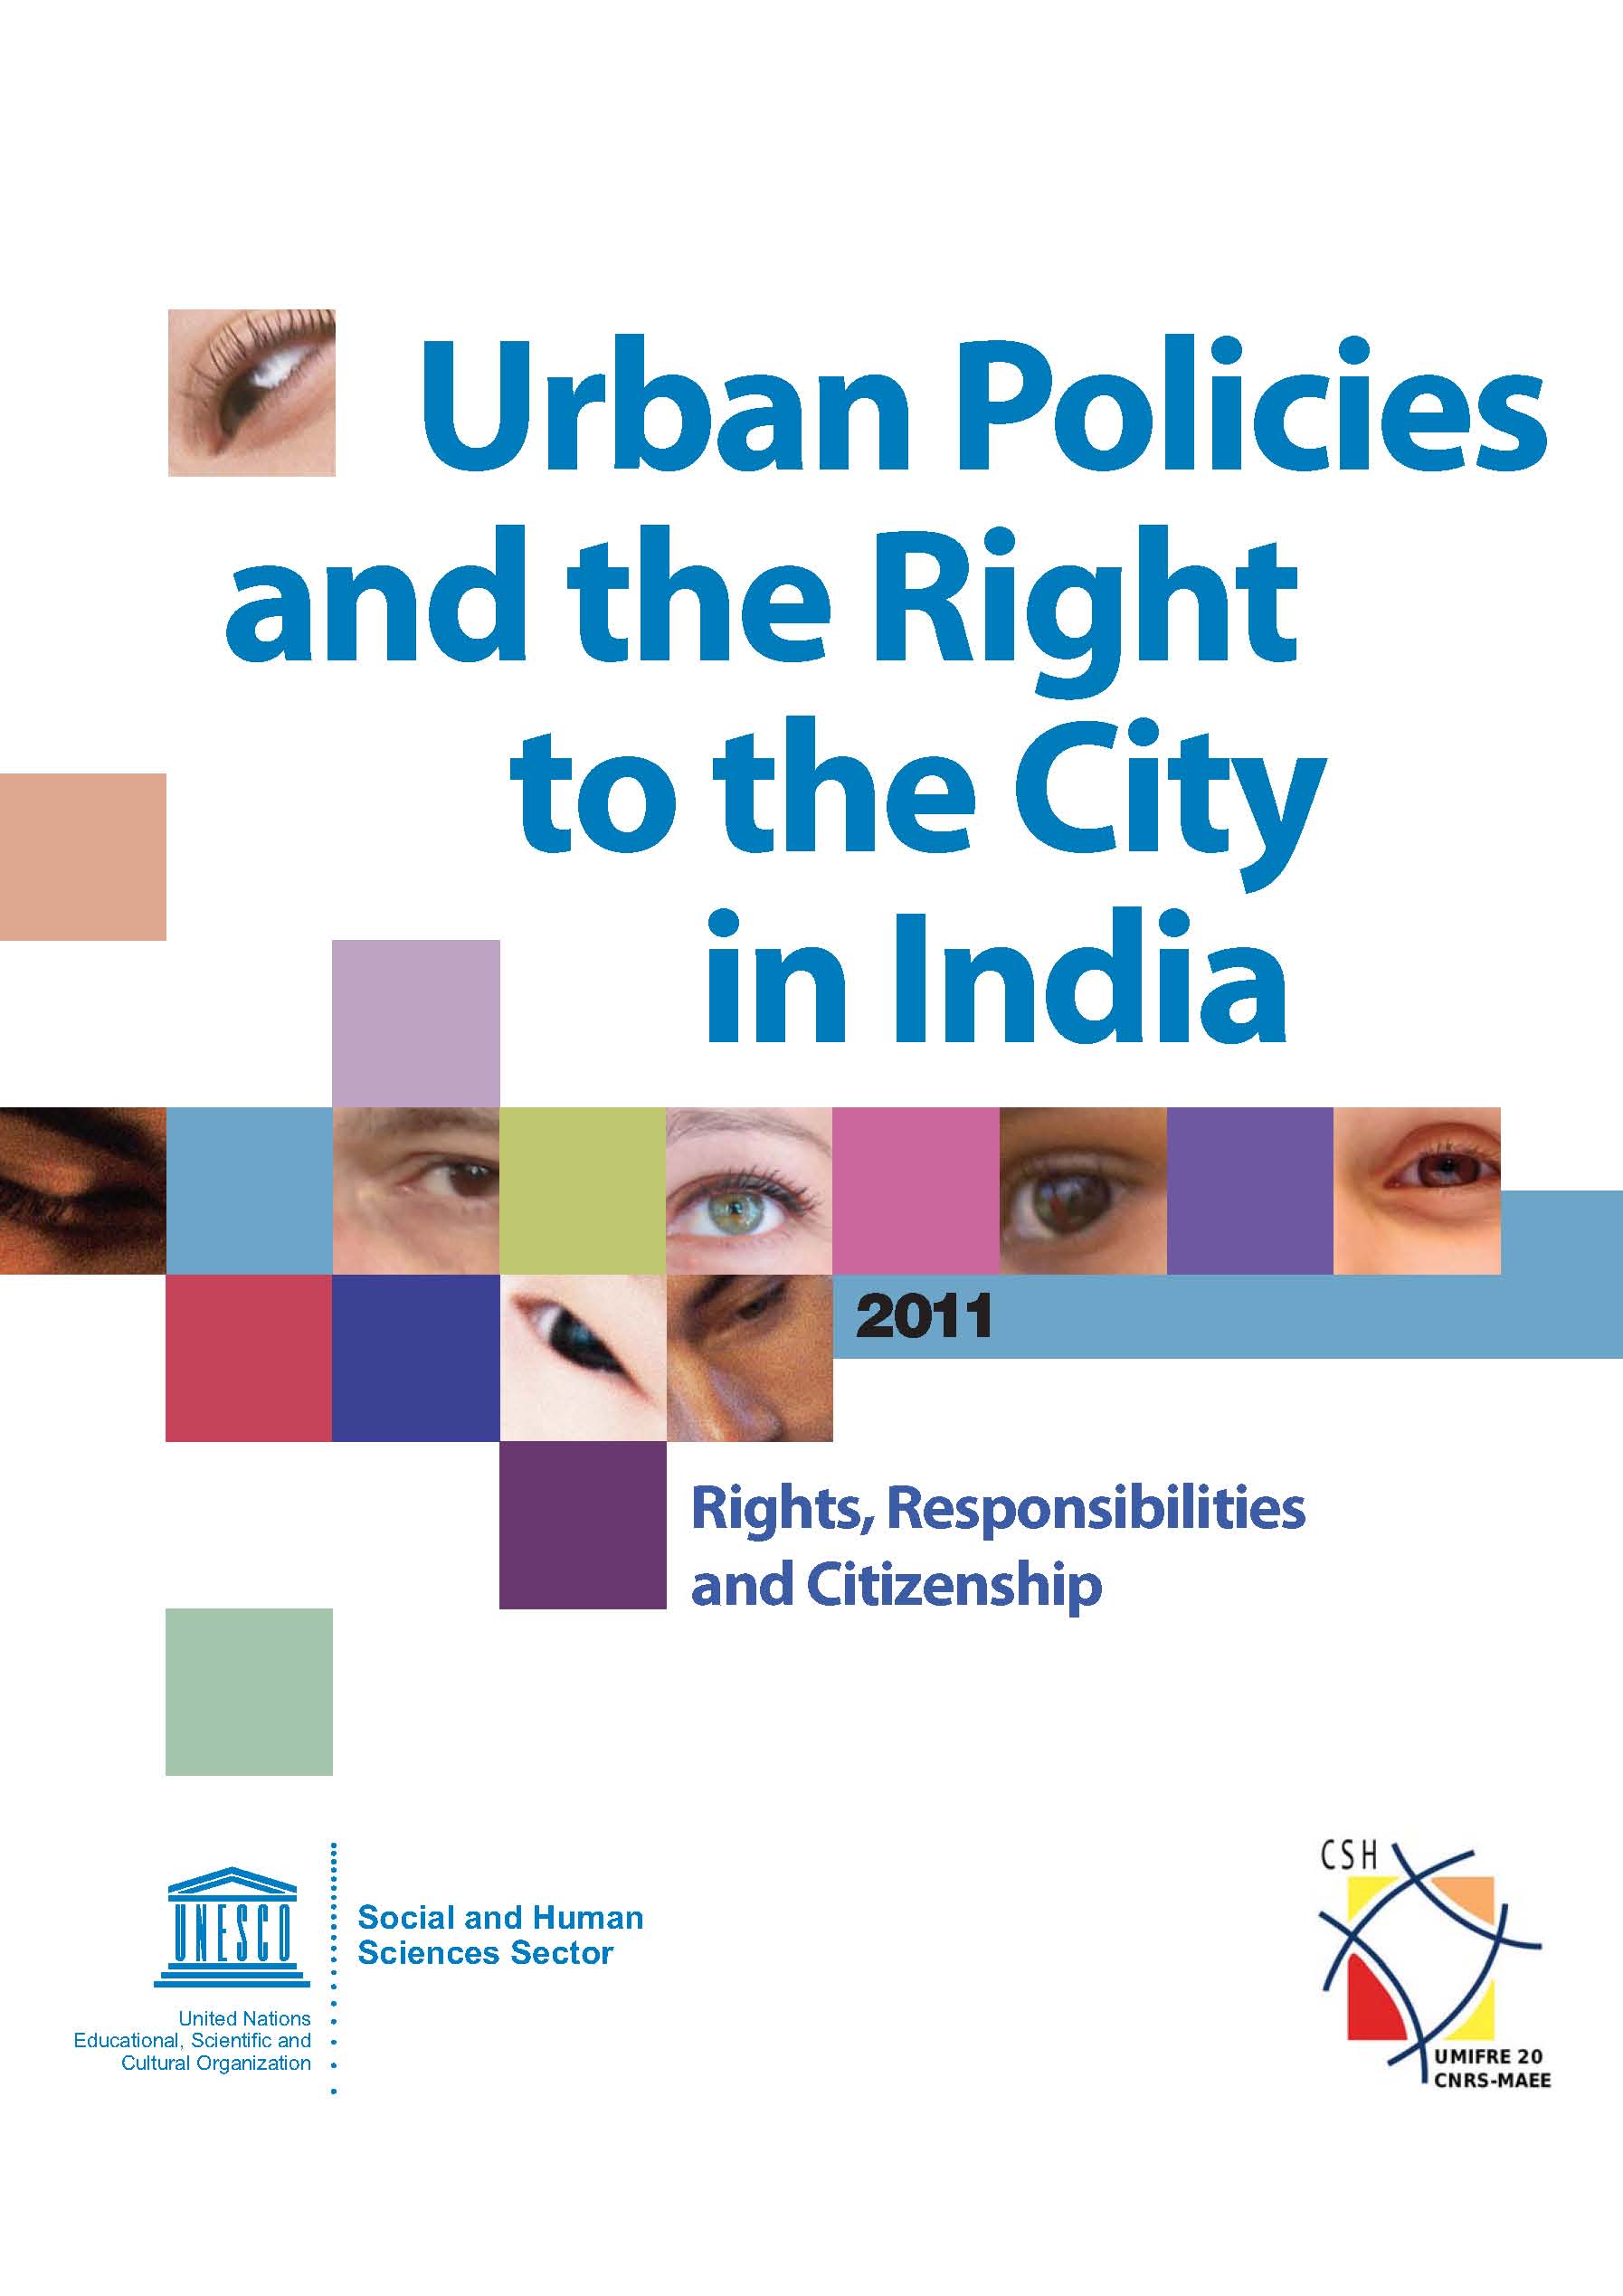 Urban Policies and the Right to the City in India